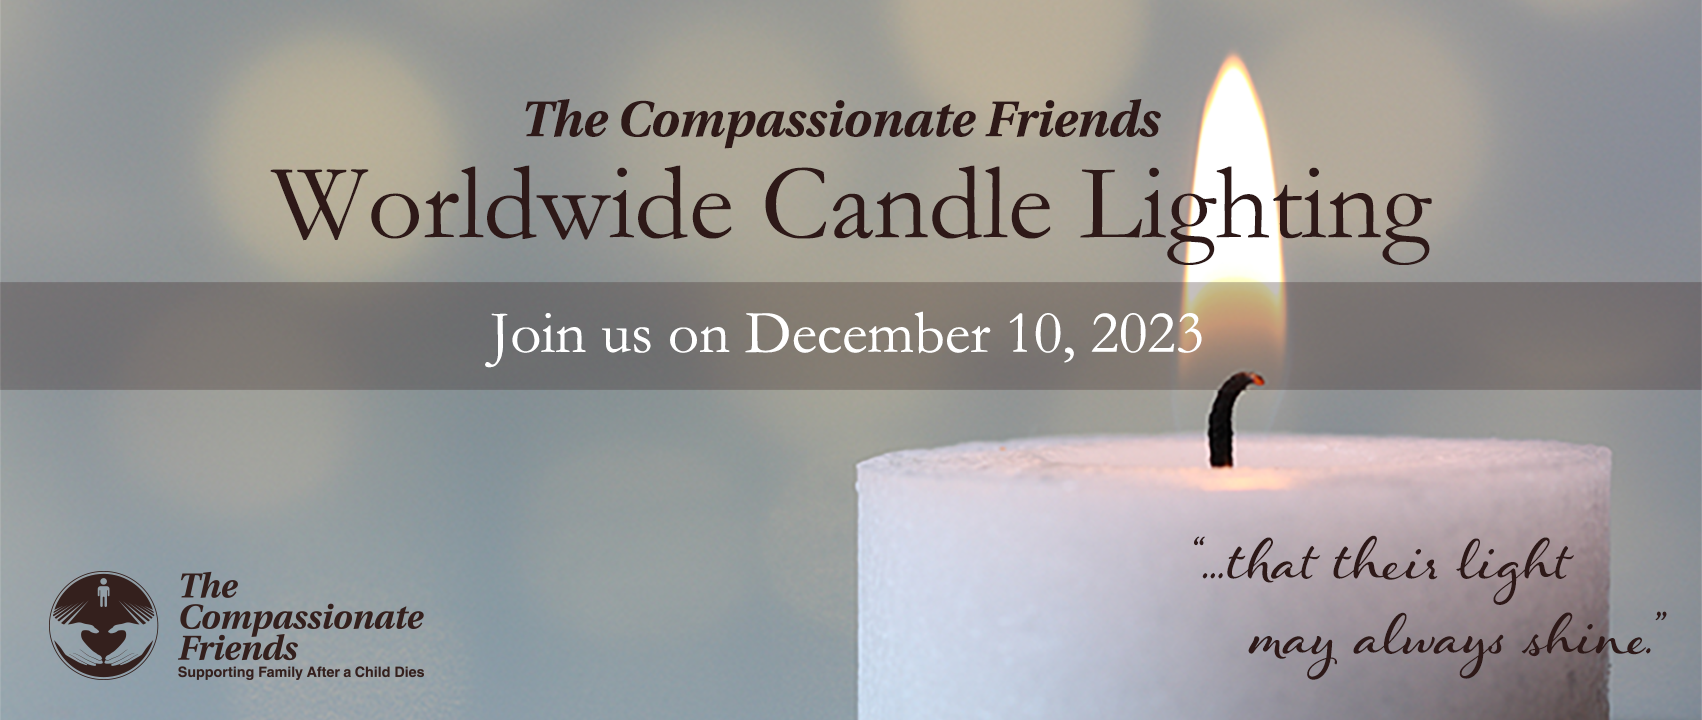 The Compassionate Friends Worldwide Candle Lighting December 10, 2023 at 7:00 PM Local Time